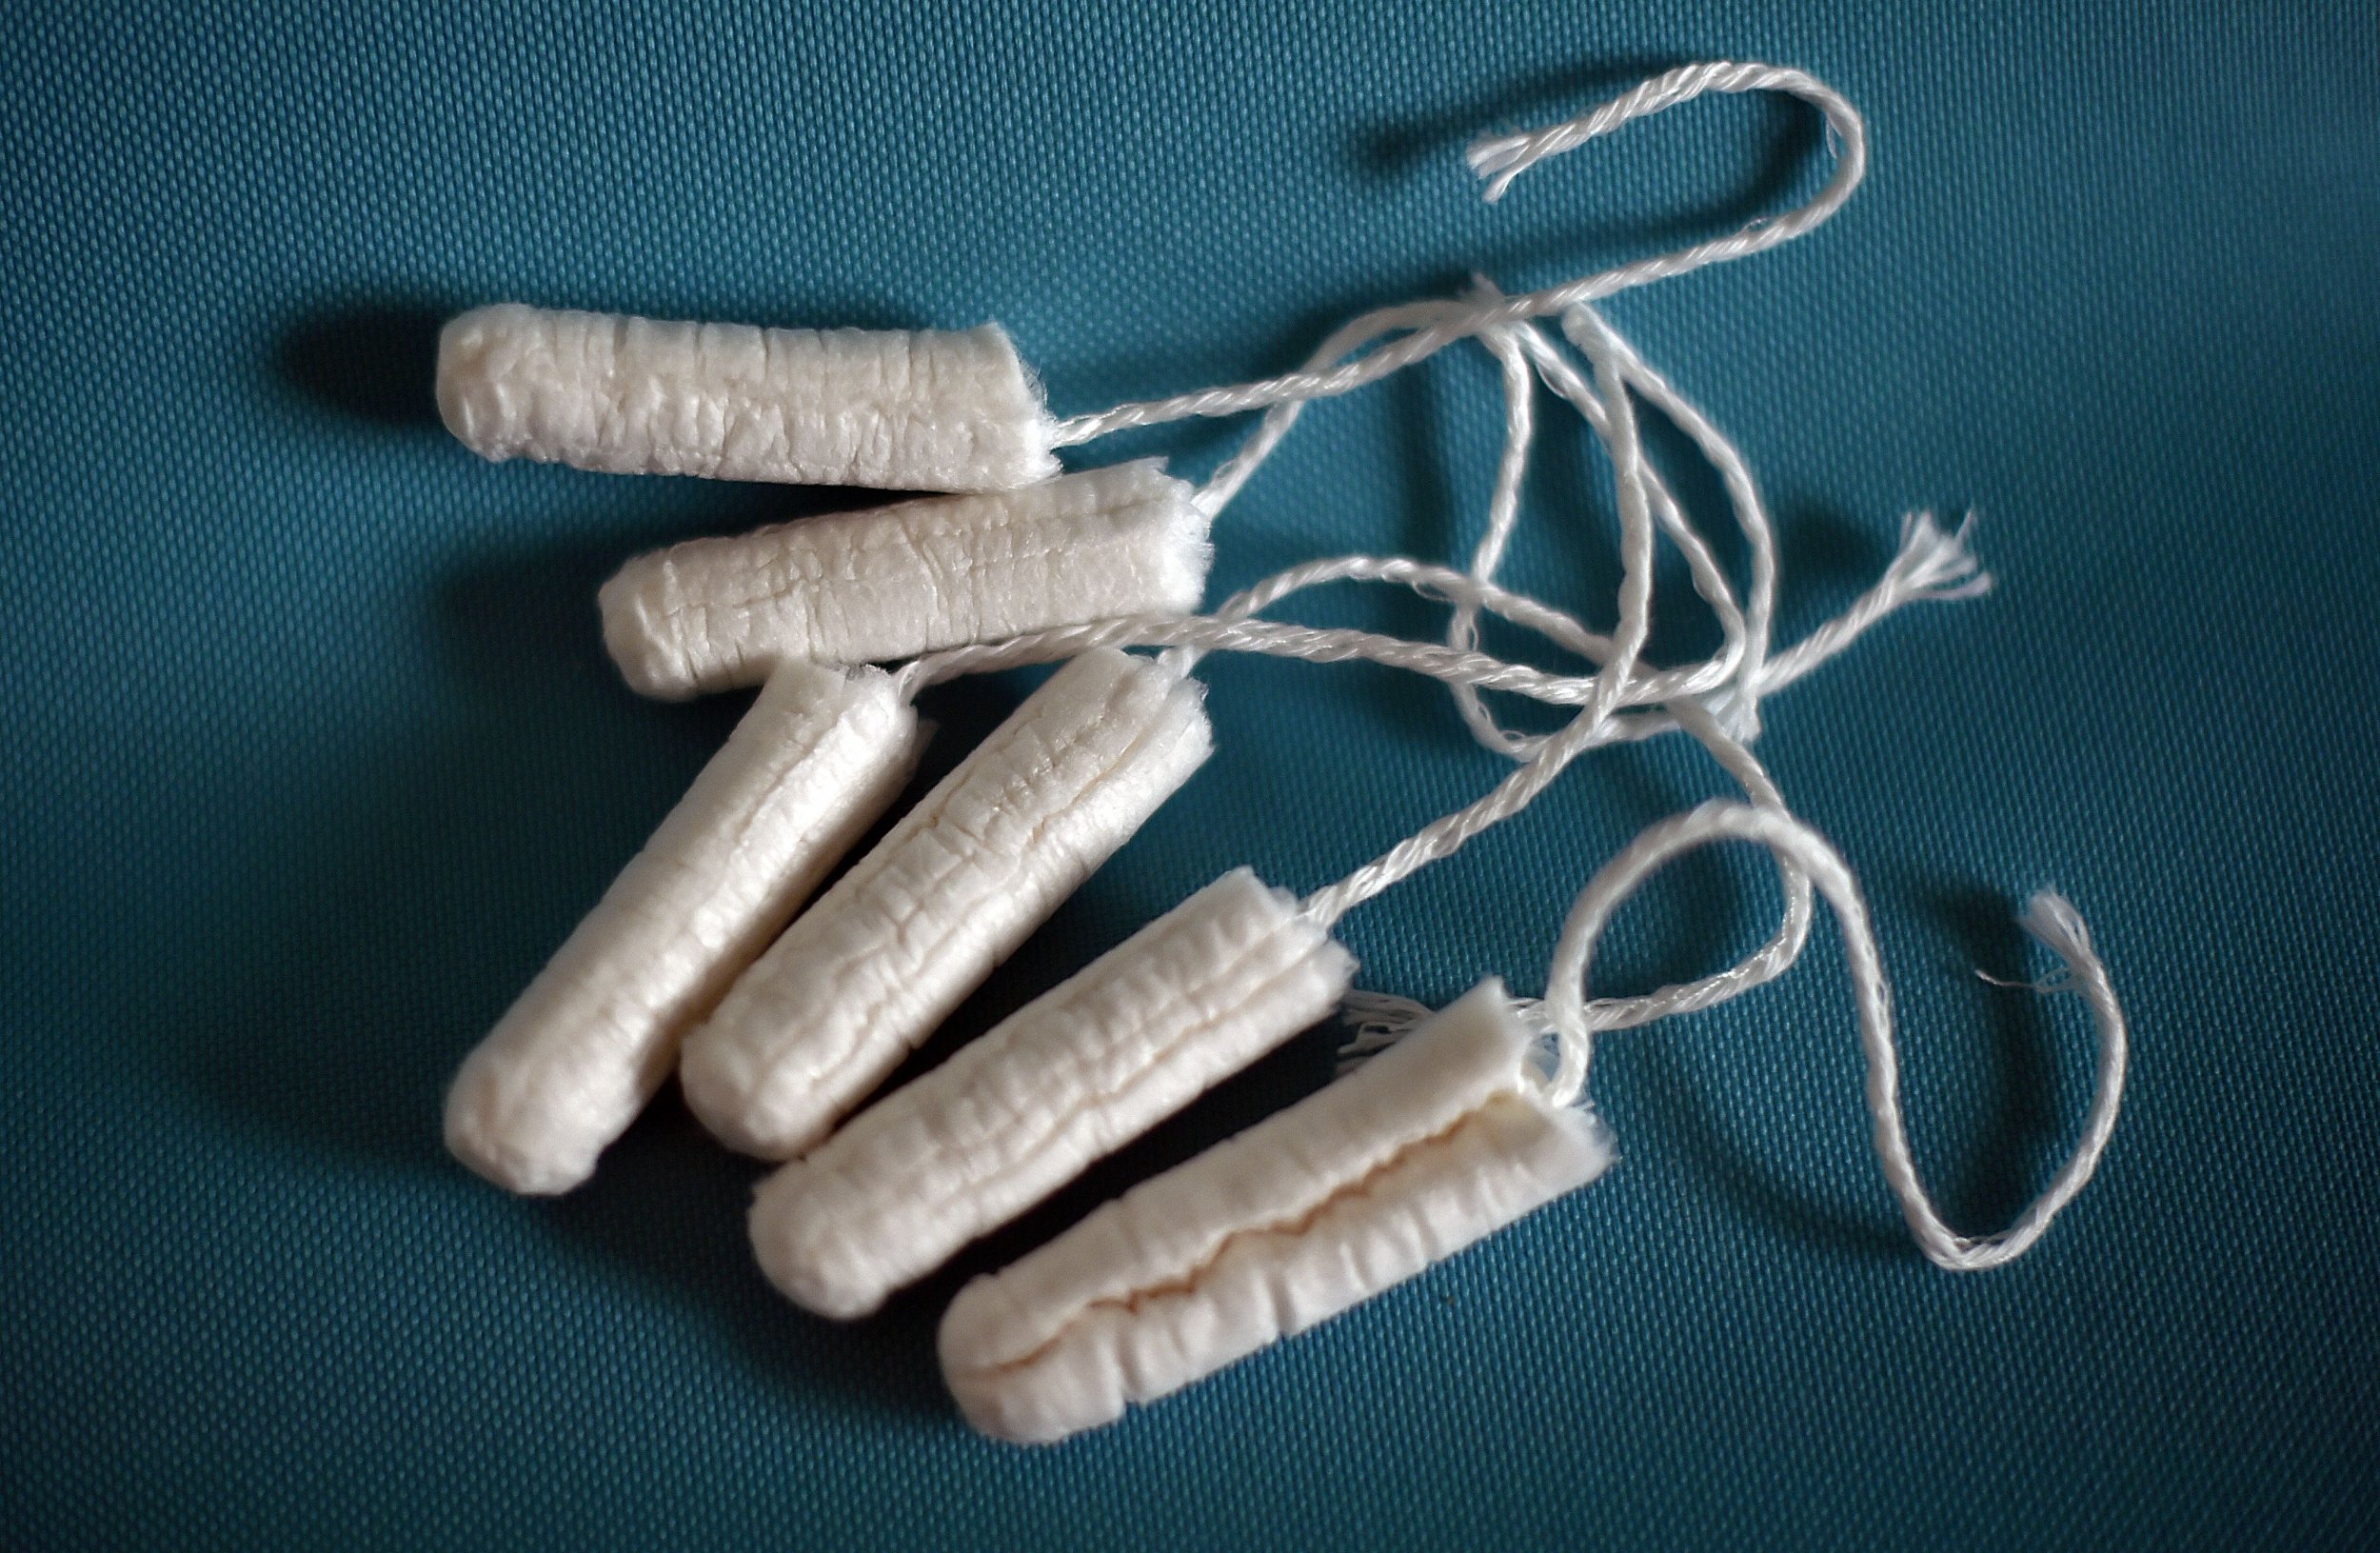 Middle School Tampons